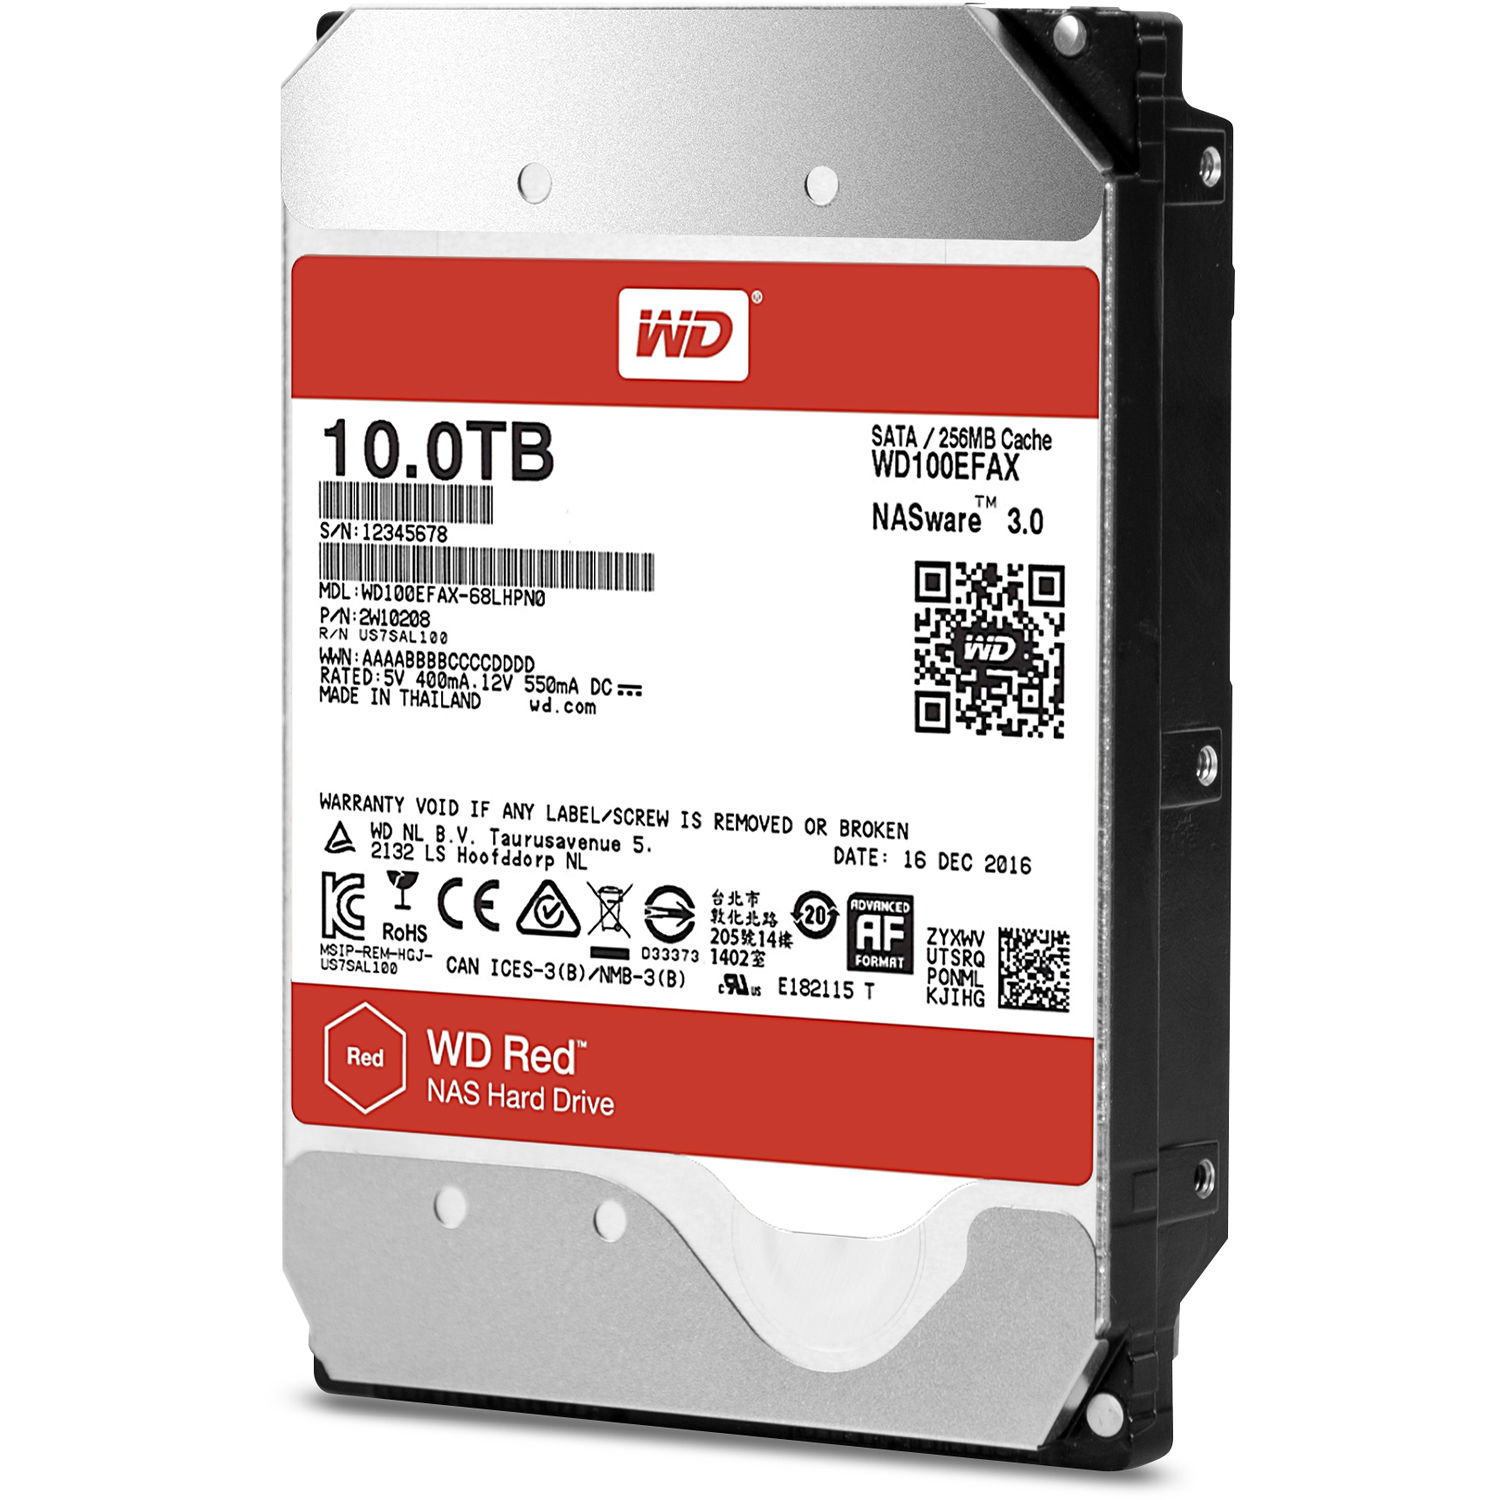 wd red nas hdd review